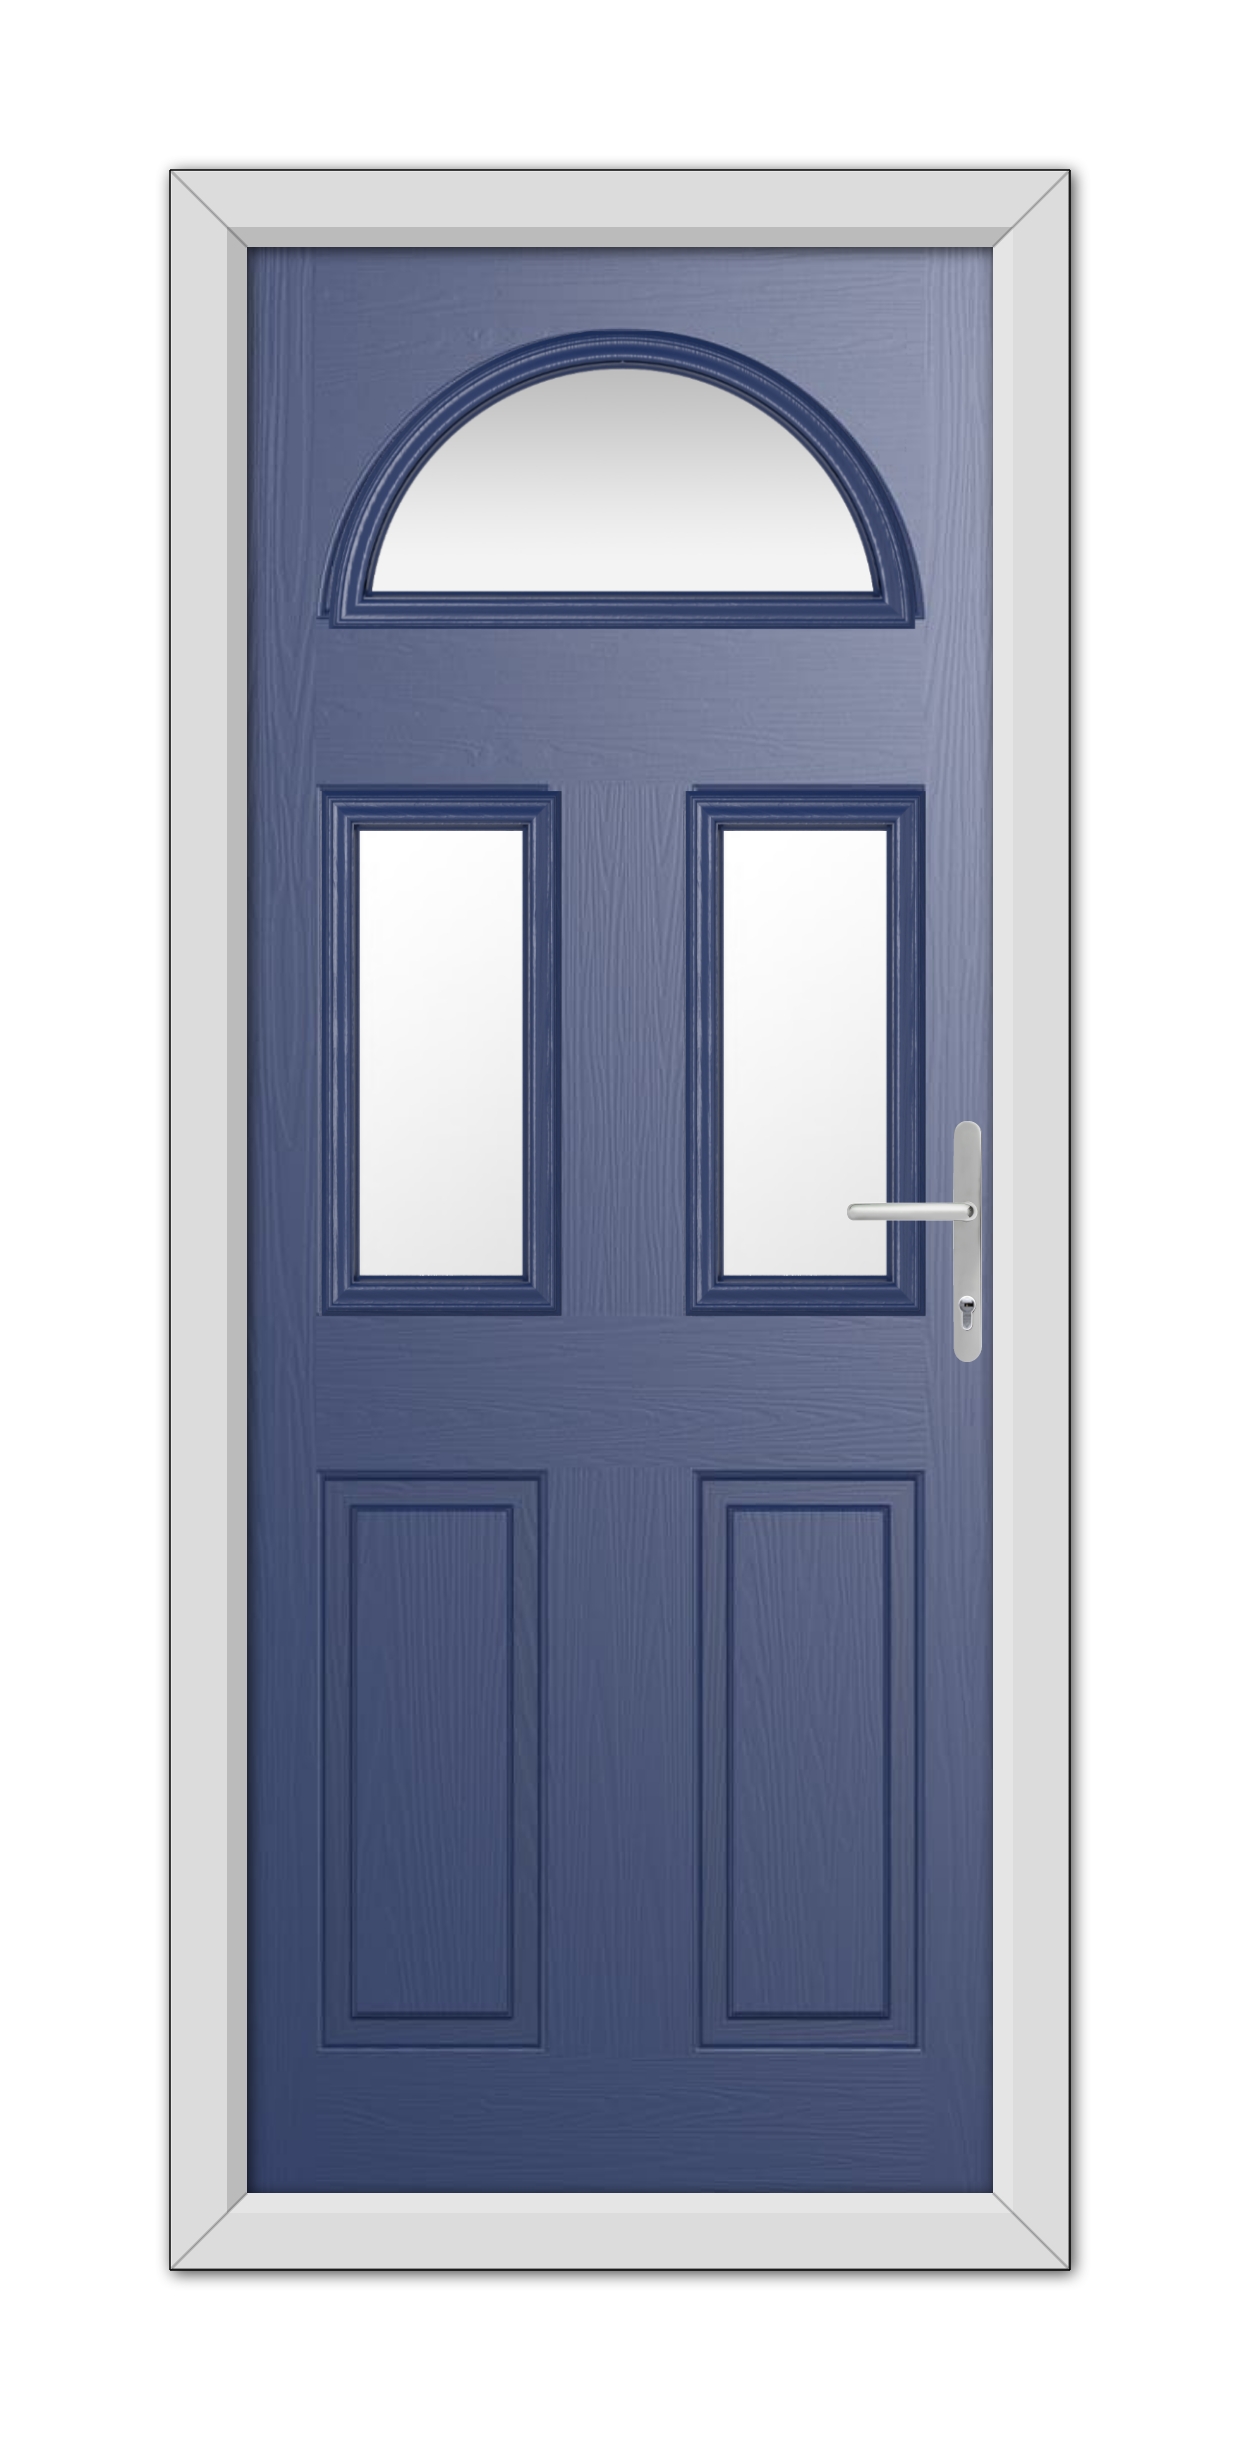 A modern Blue Winslow 3 Composite Door 48mm Timber Core with two panels, each featuring a top window, set within a white frame and equipped with a silver handle.